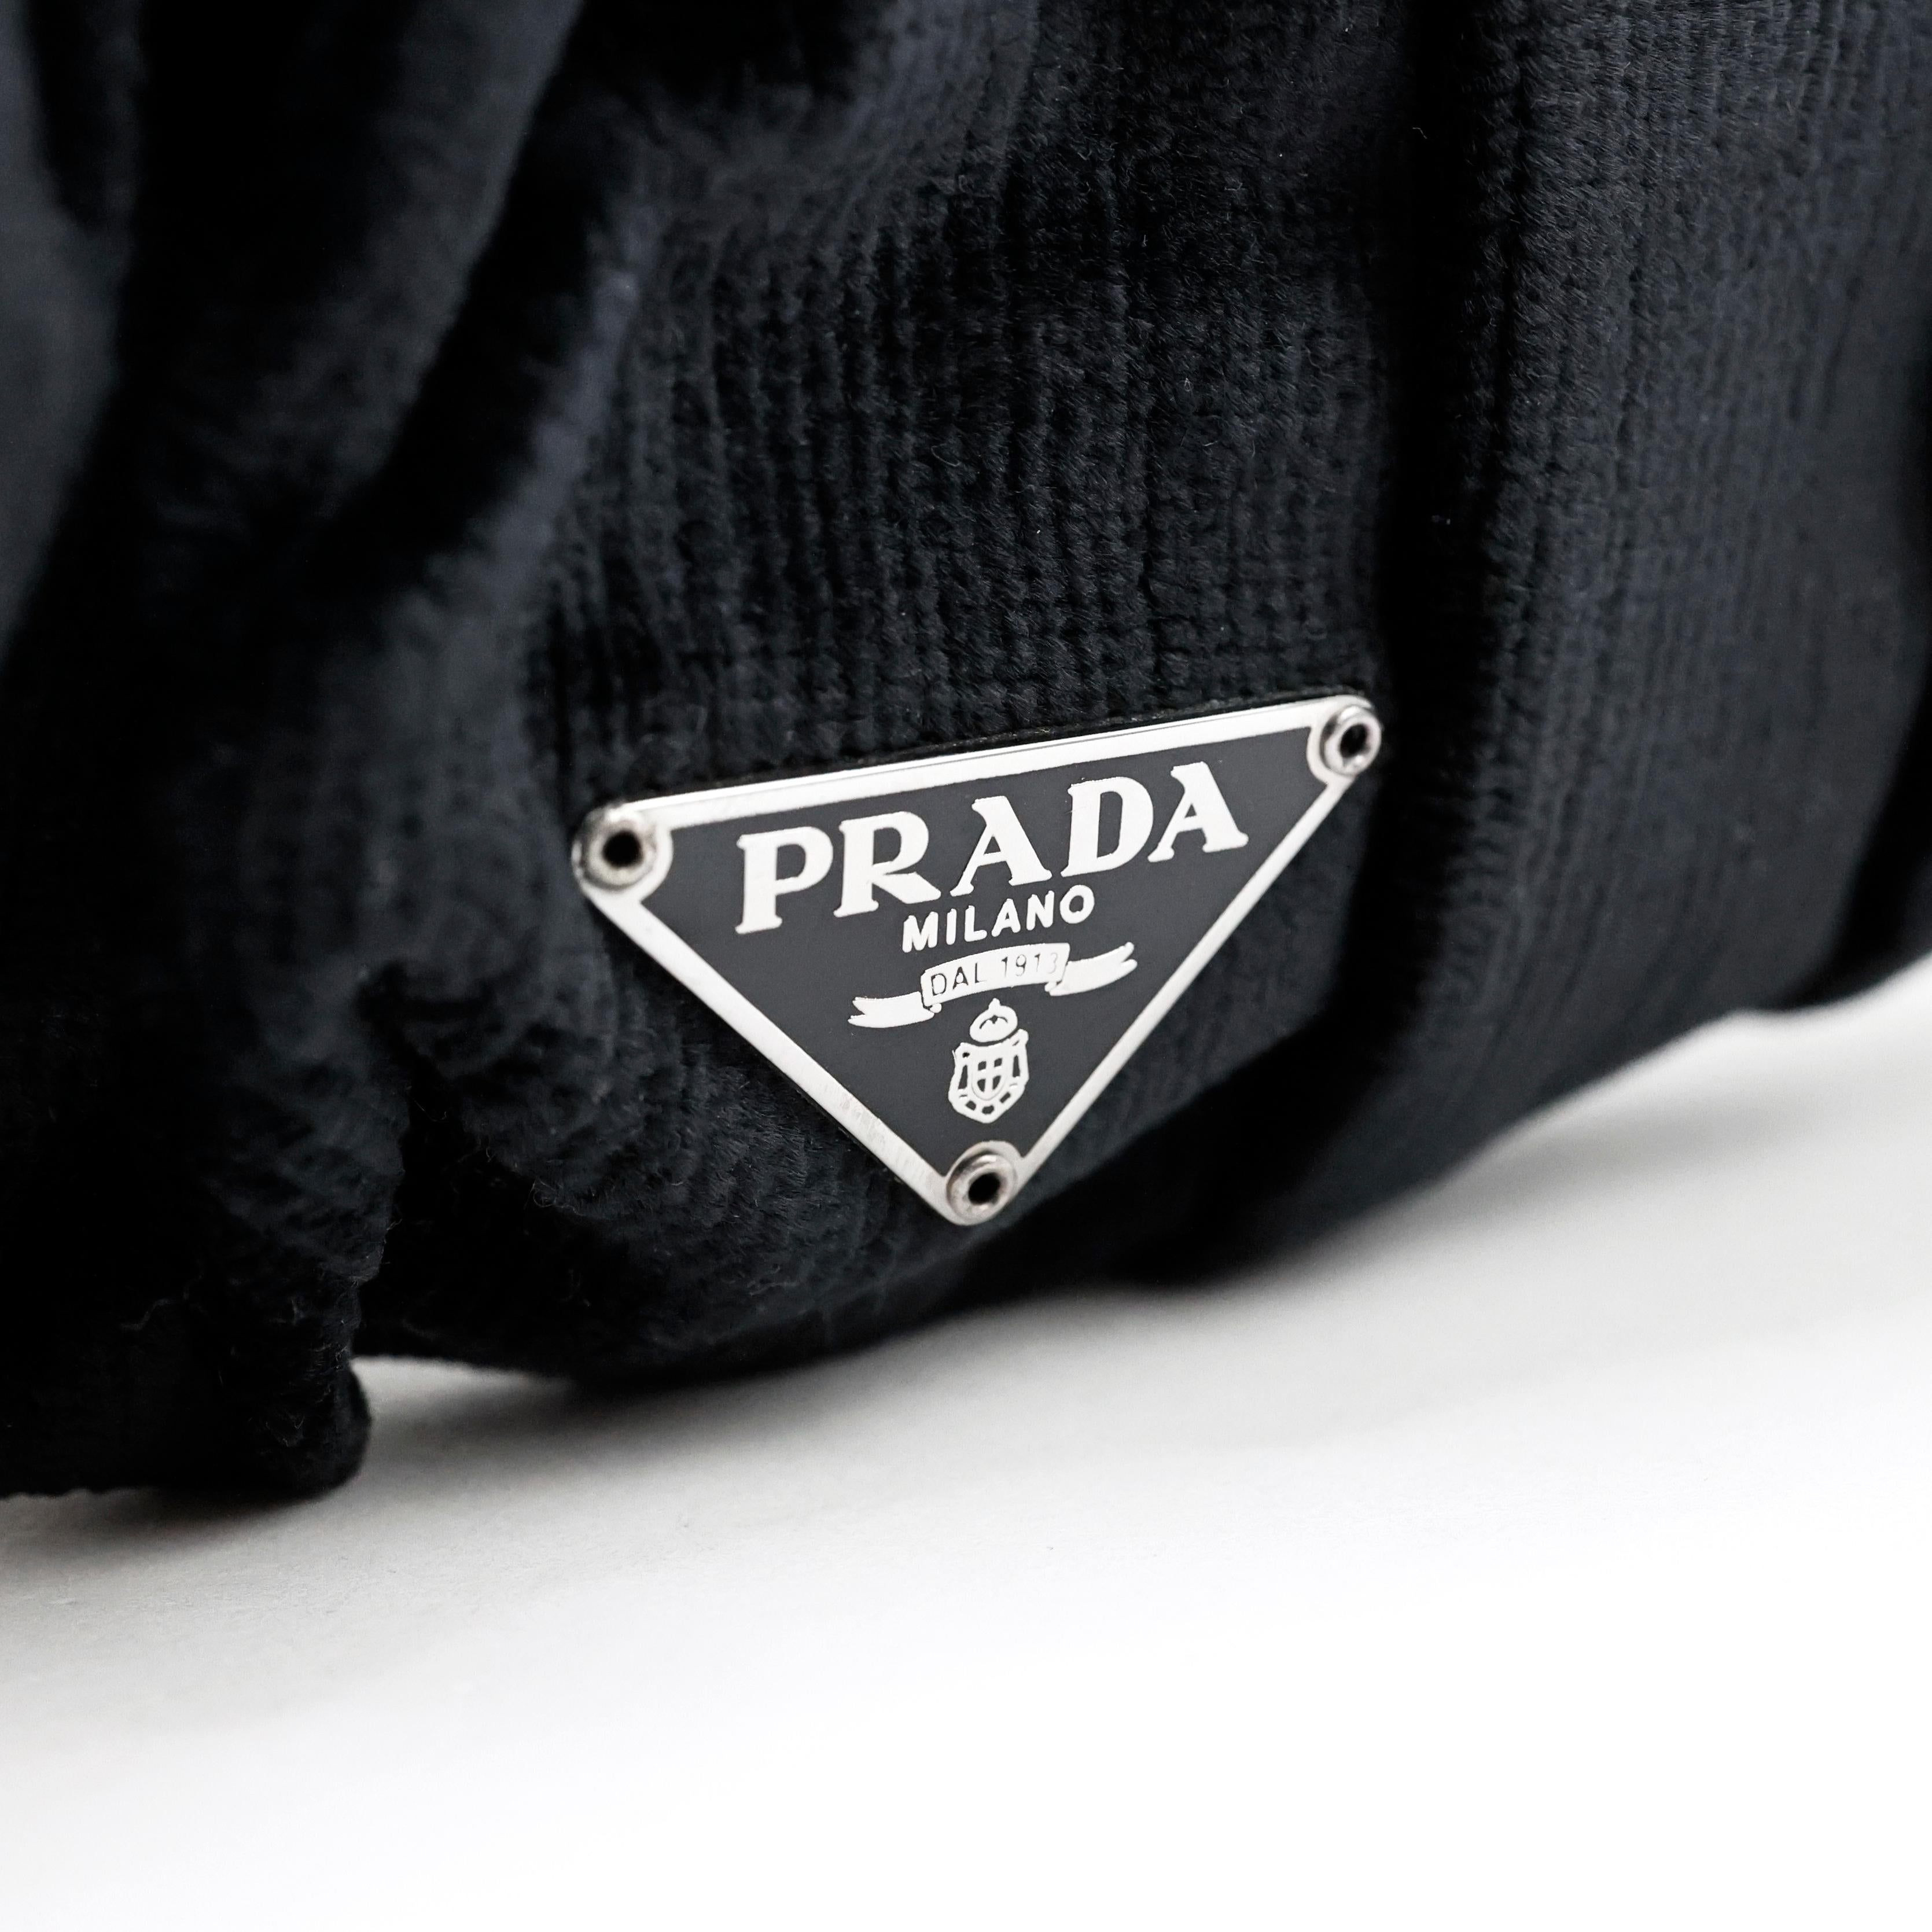 Prada Bag in black embroidered corduroy and silk In Excellent Condition For Sale In Bressanone, IT